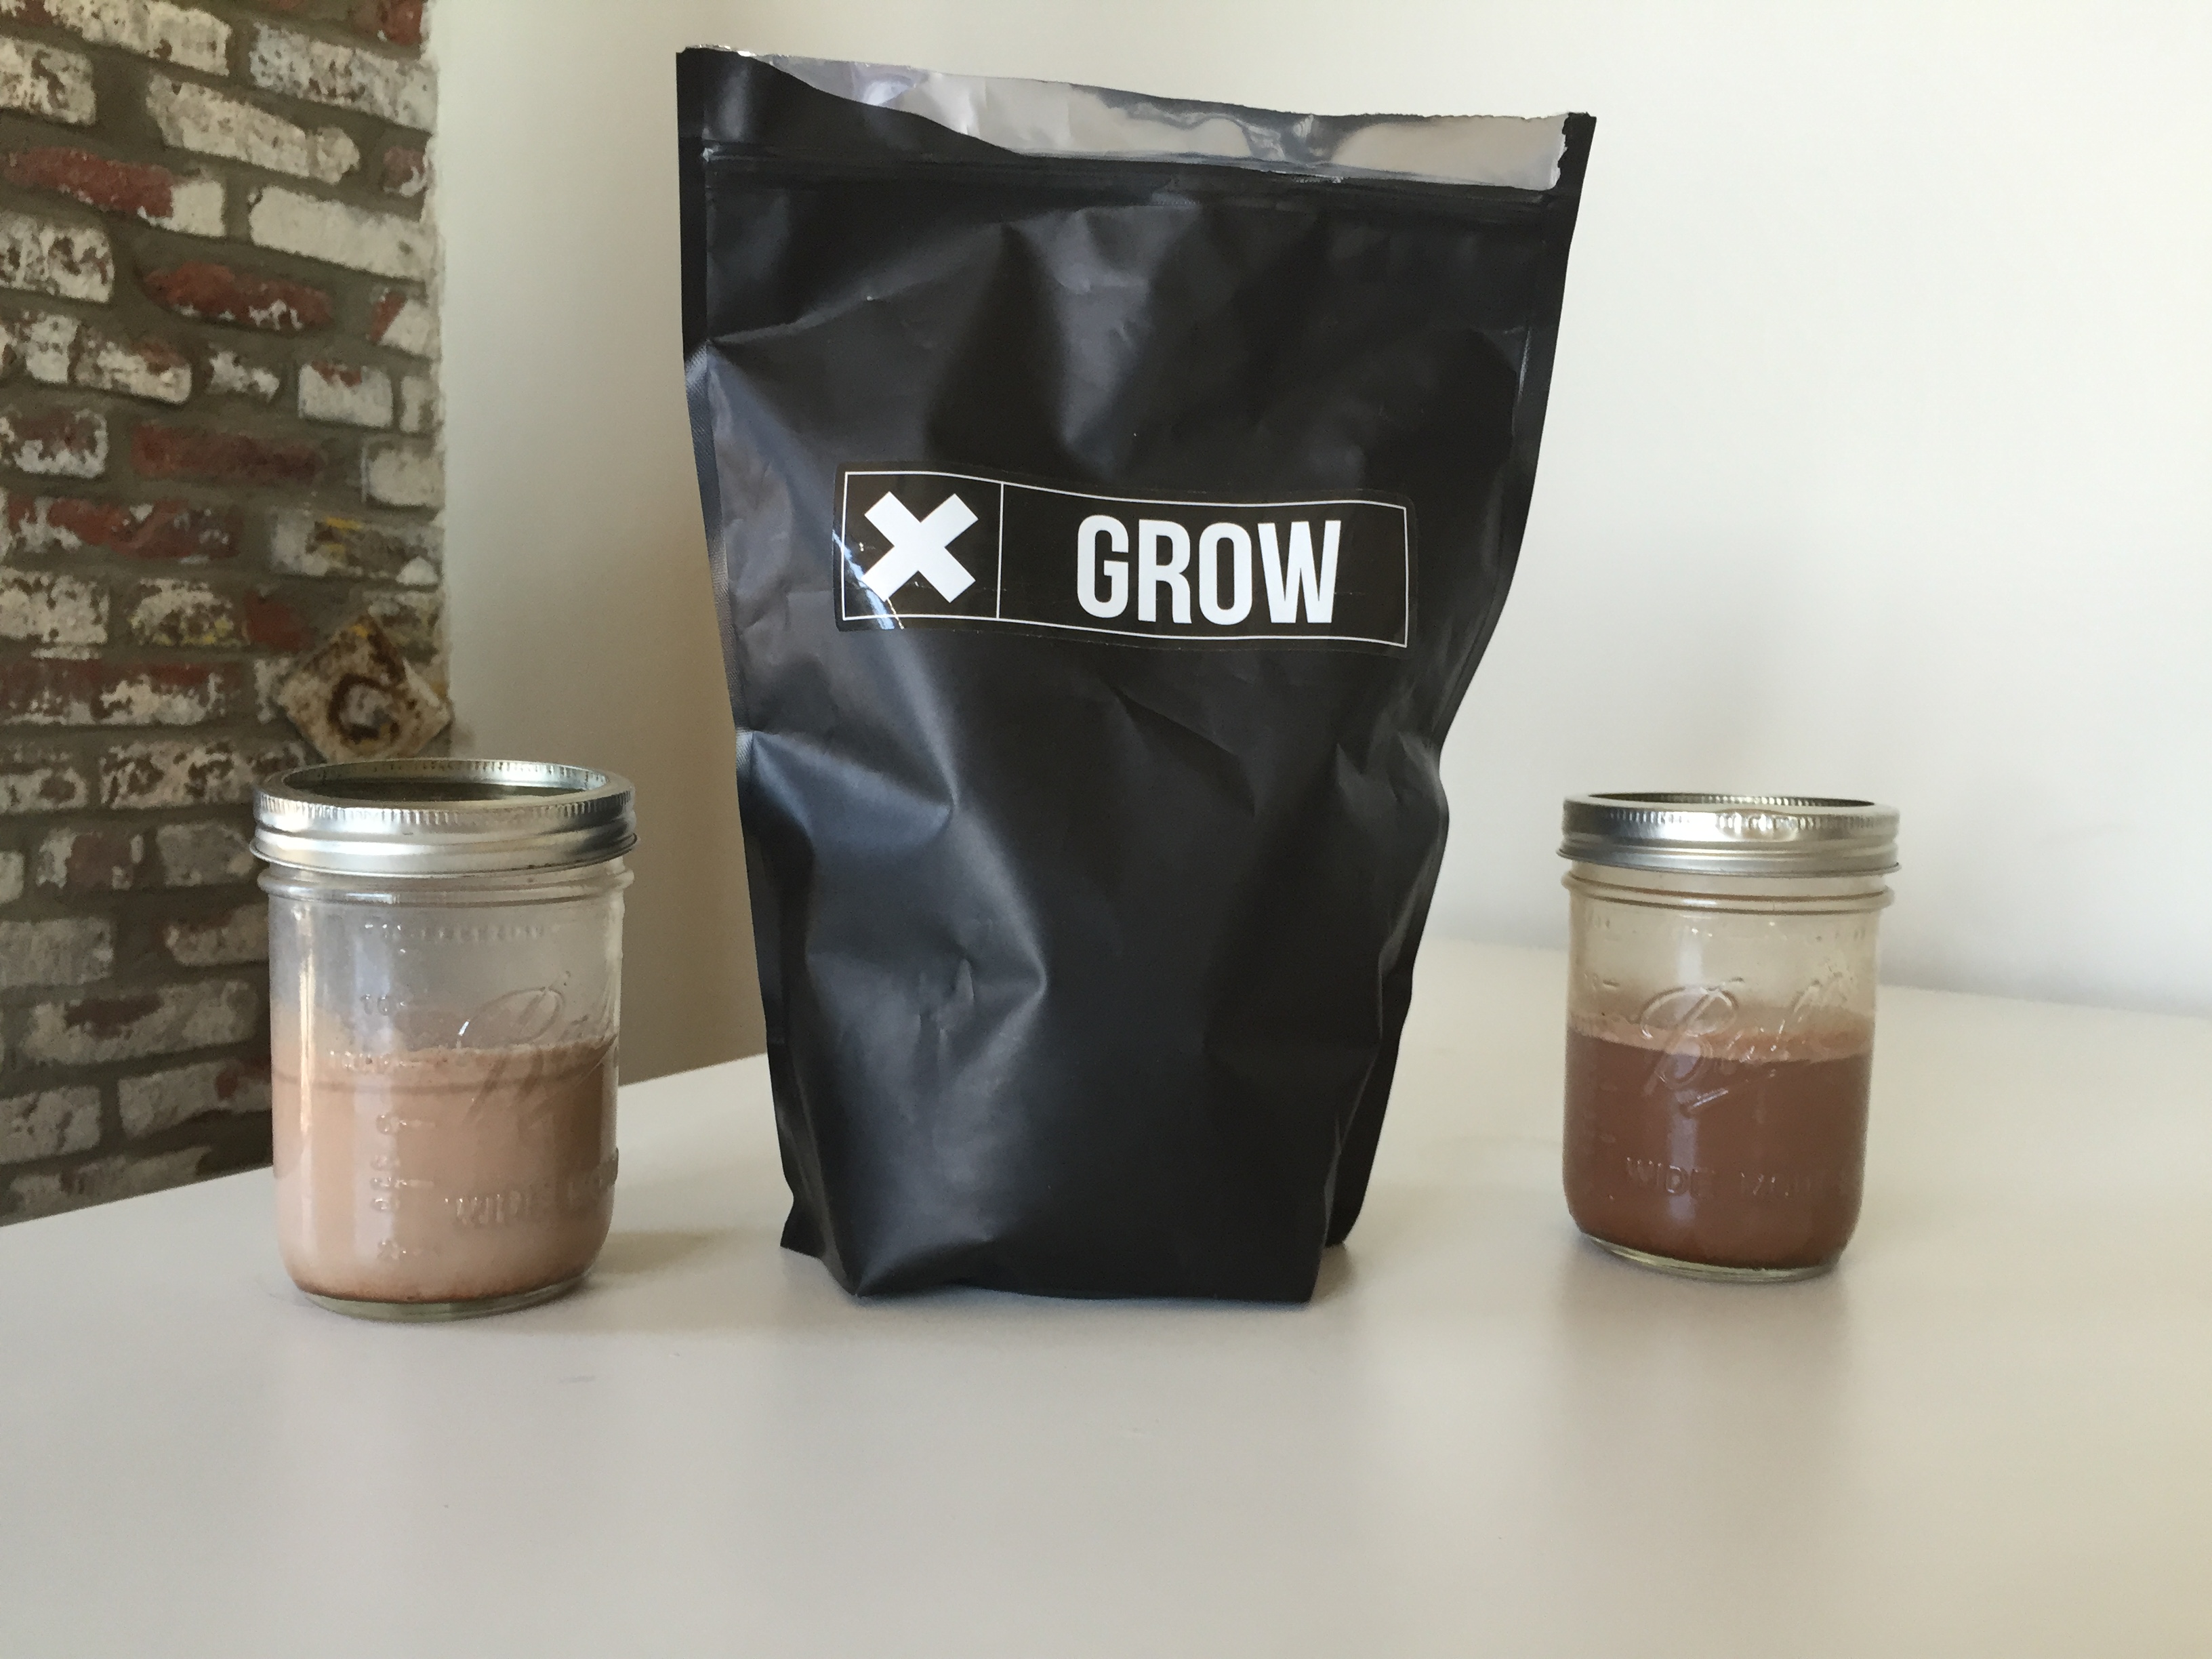 Xwerks Grow Protein Review